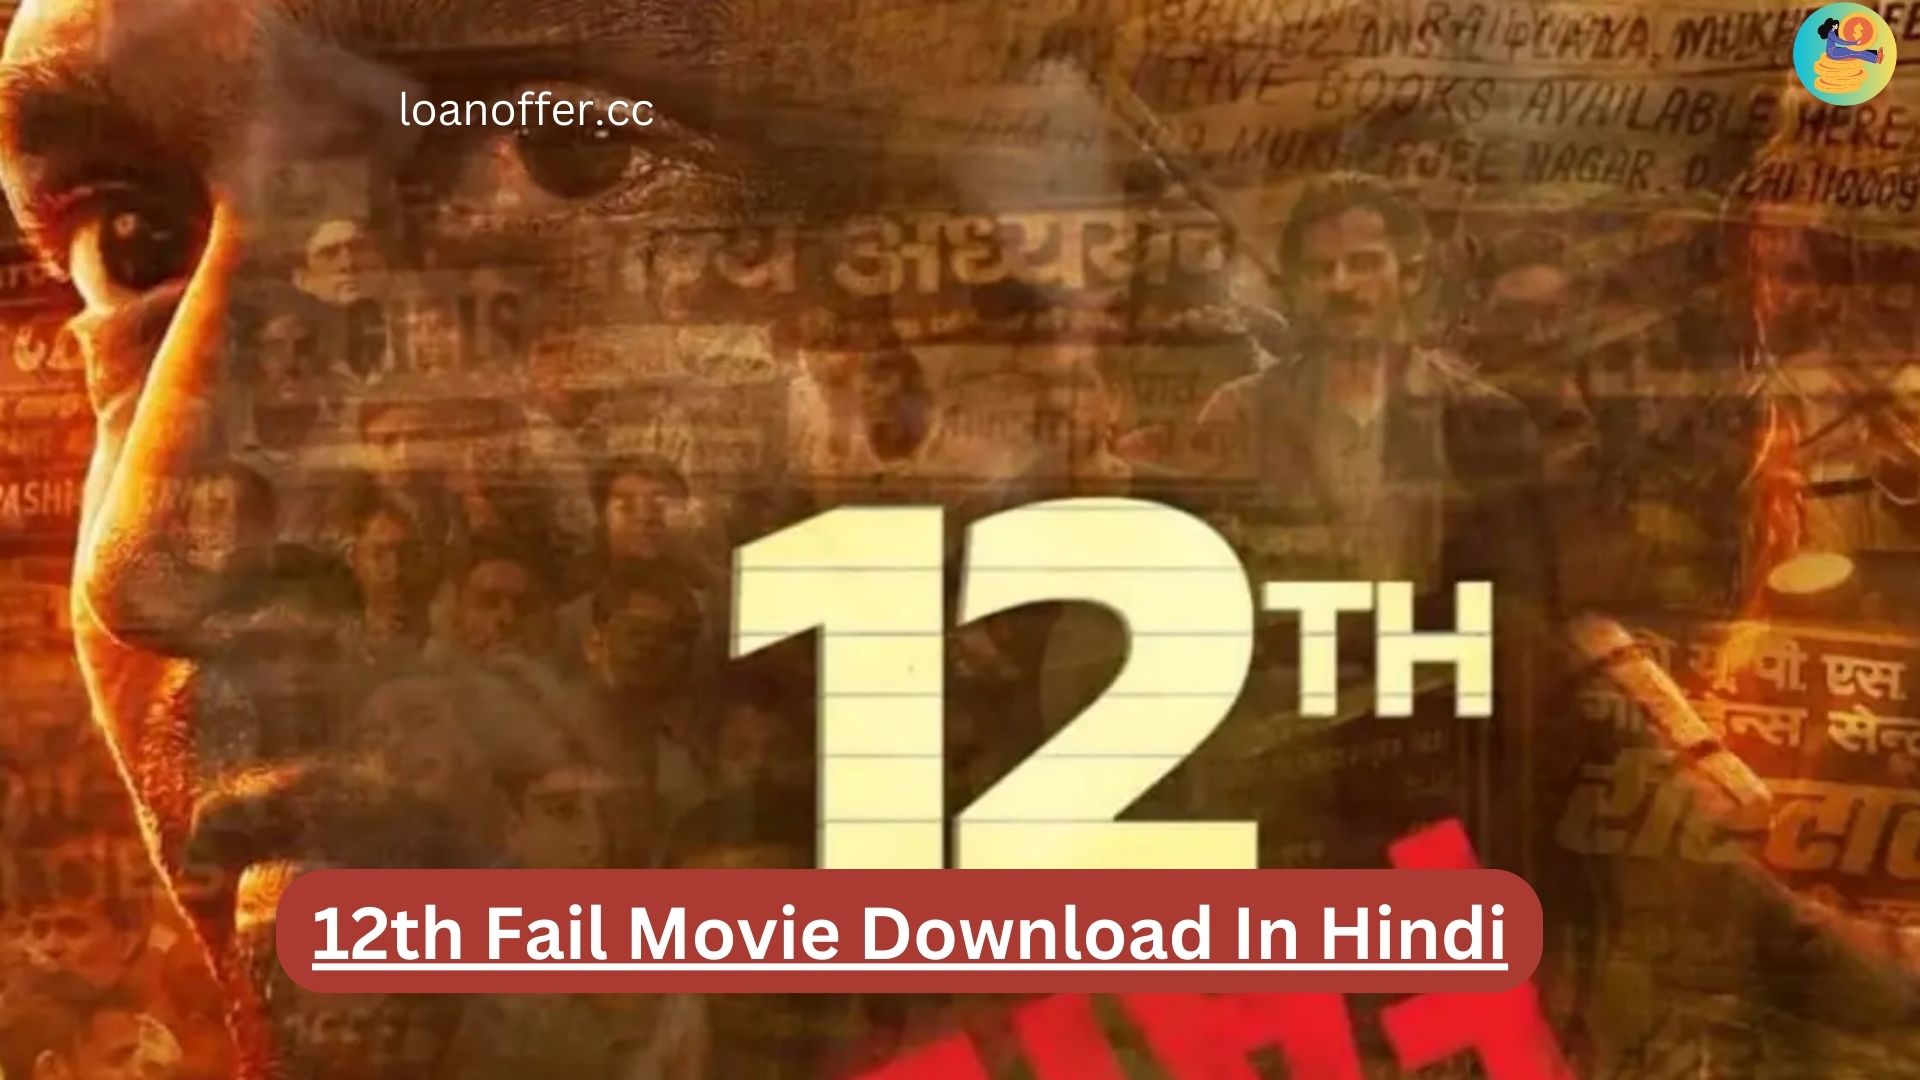 12th Fail Movie Download In Hindi